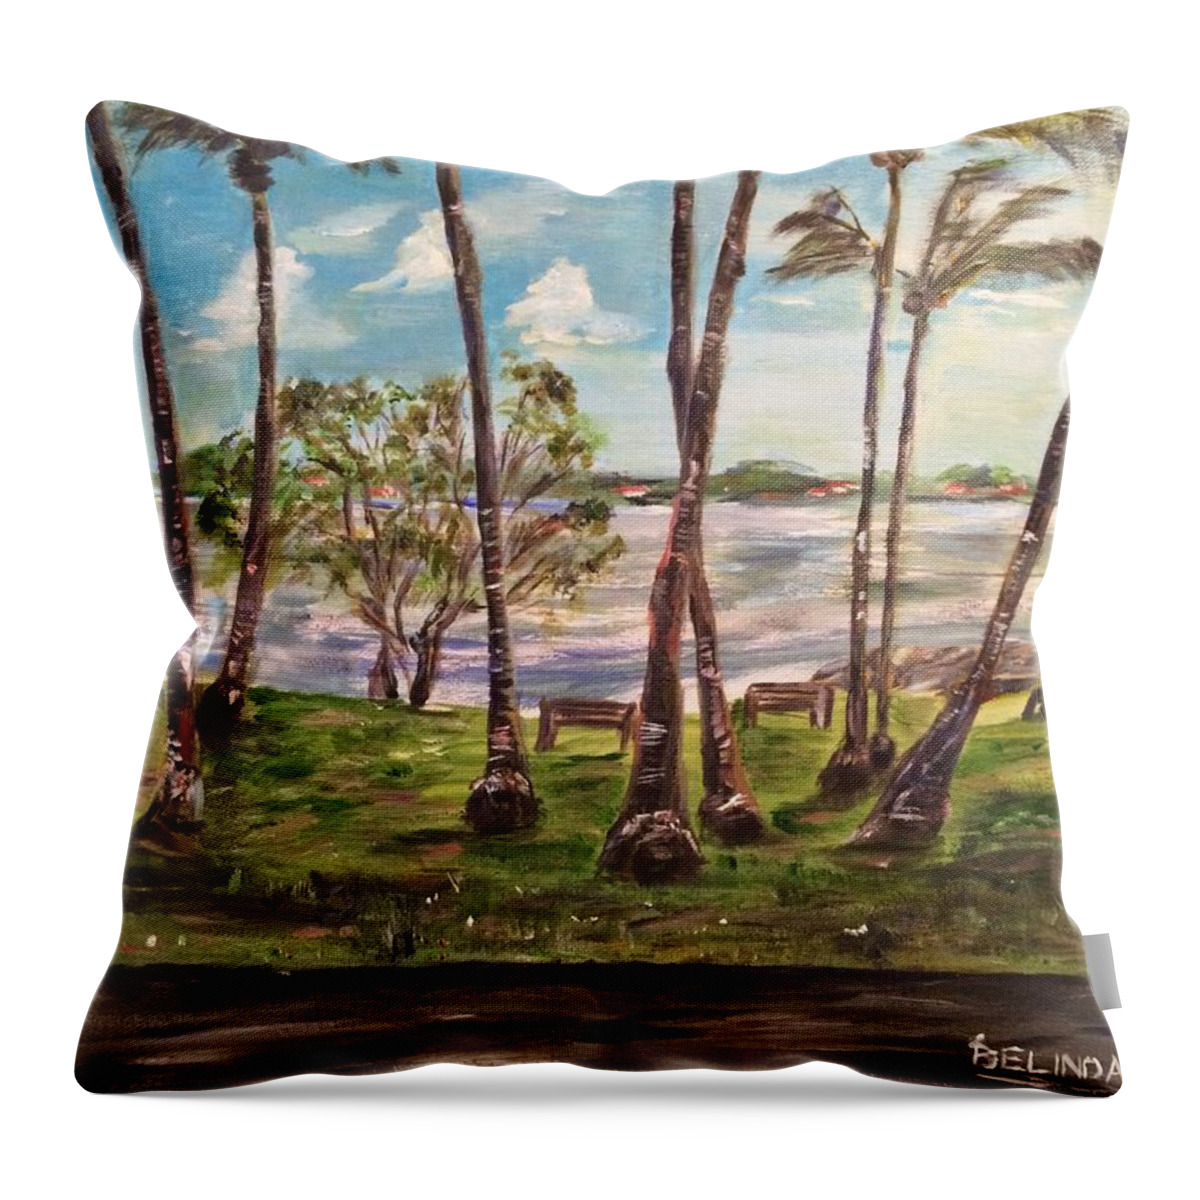 Sea Throw Pillow featuring the painting I Am Always With You by Belinda Low